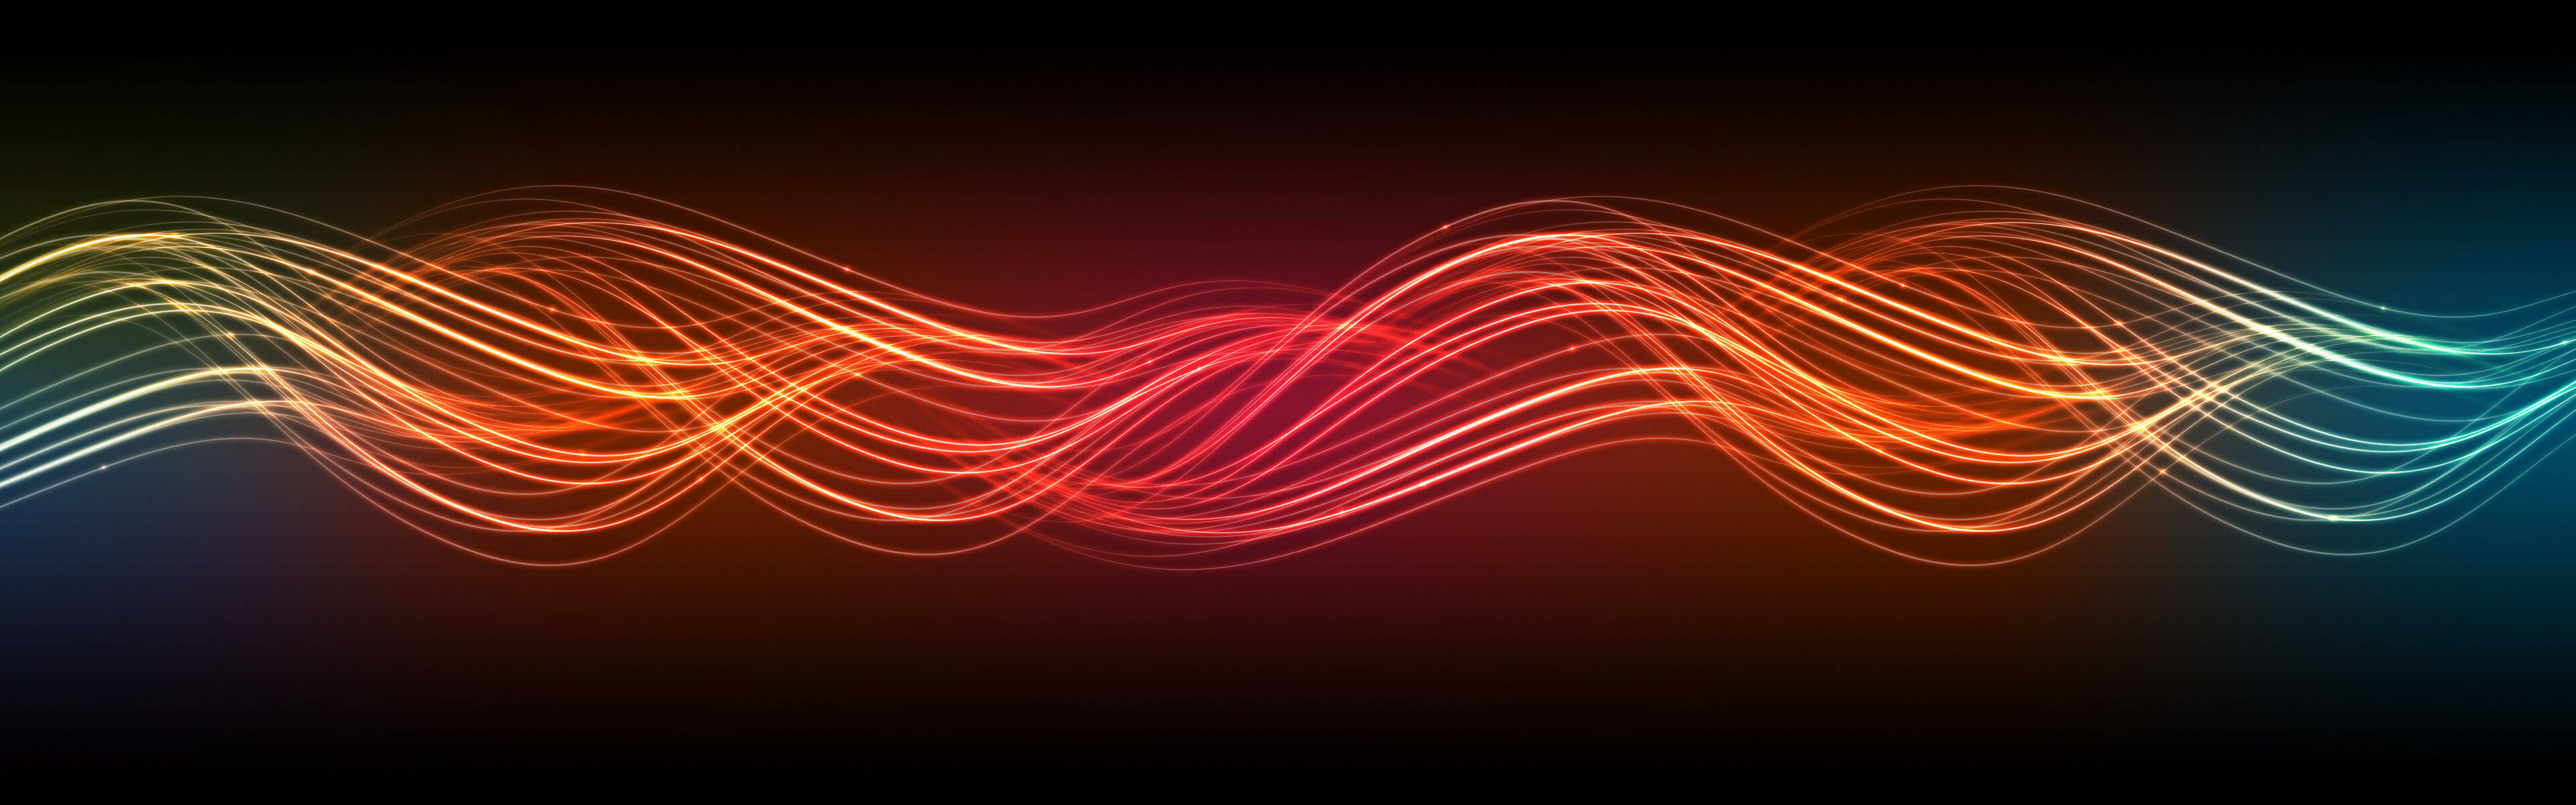 High Resolution Dual Monitor Flowing Lines Wallpaper